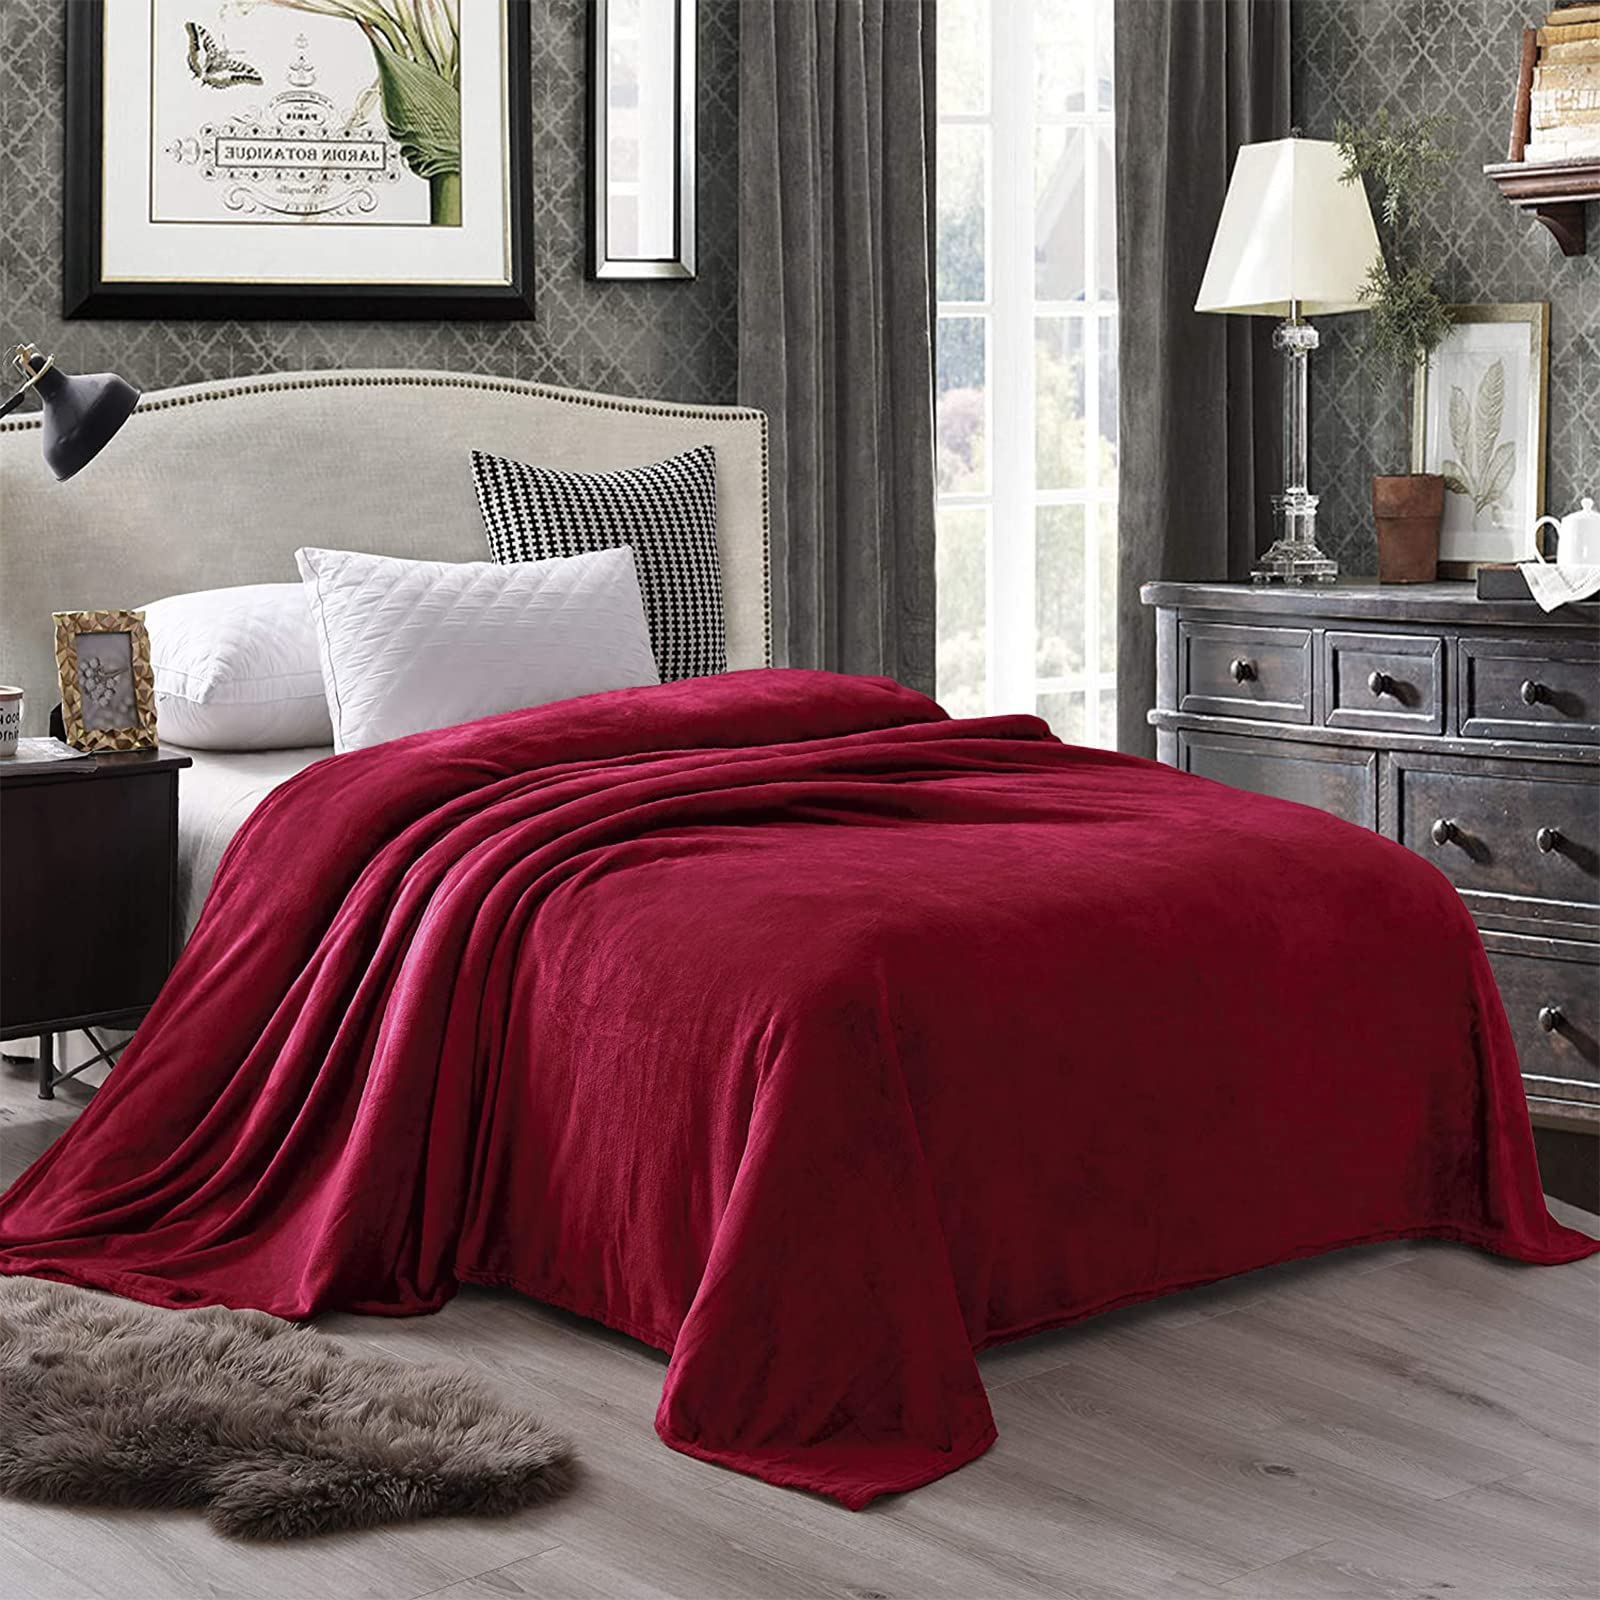 Exclusivo Mezcla King Size Flannel Fleece Velvet Plush Bed Blanket as Bedspread, coverlet, Bed cover (90x104 inches, Deep Red) S